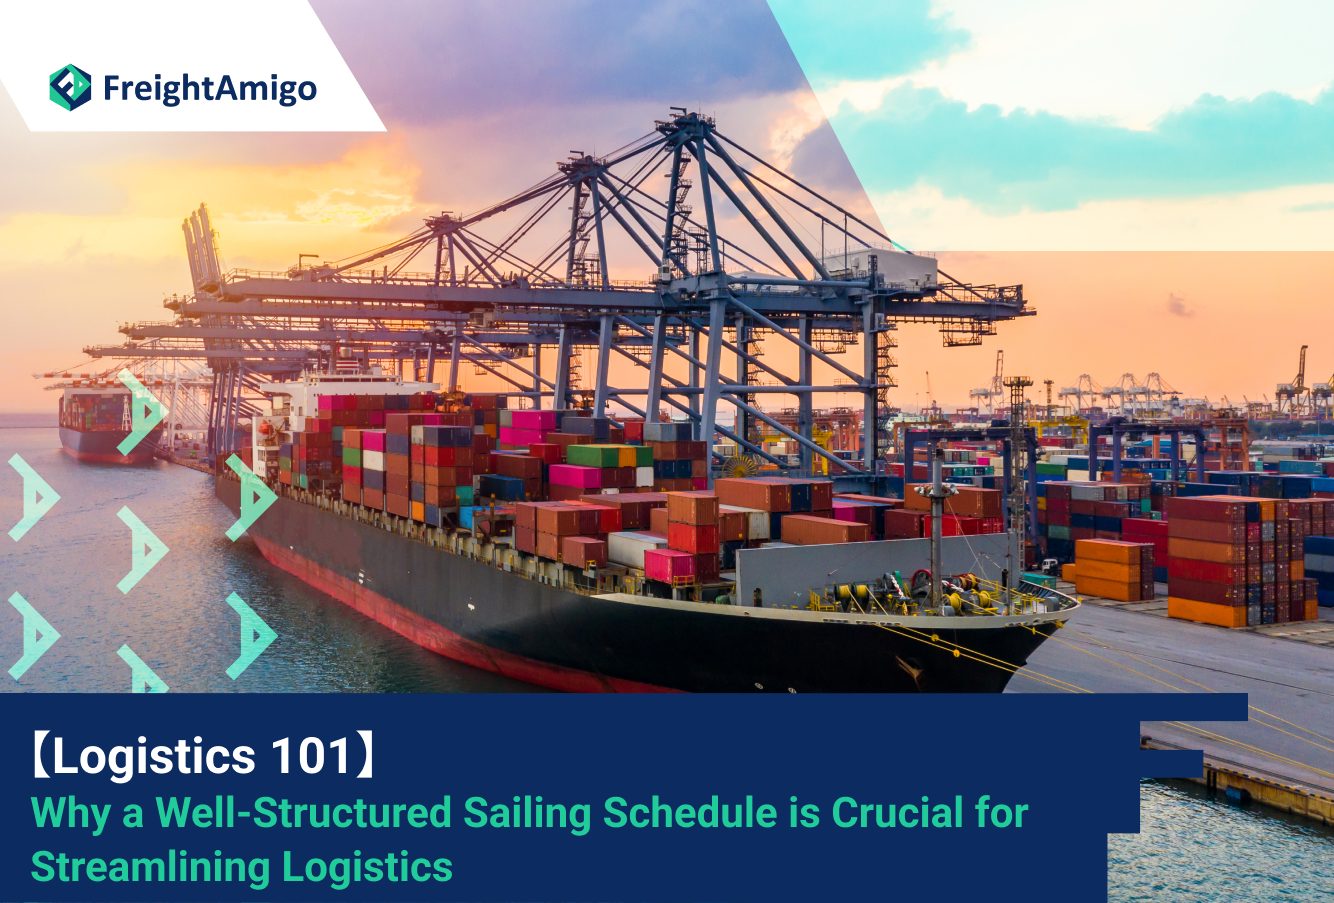 Why a Well-Structured Sailing Schedule is Crucial for Streamlining Logistics